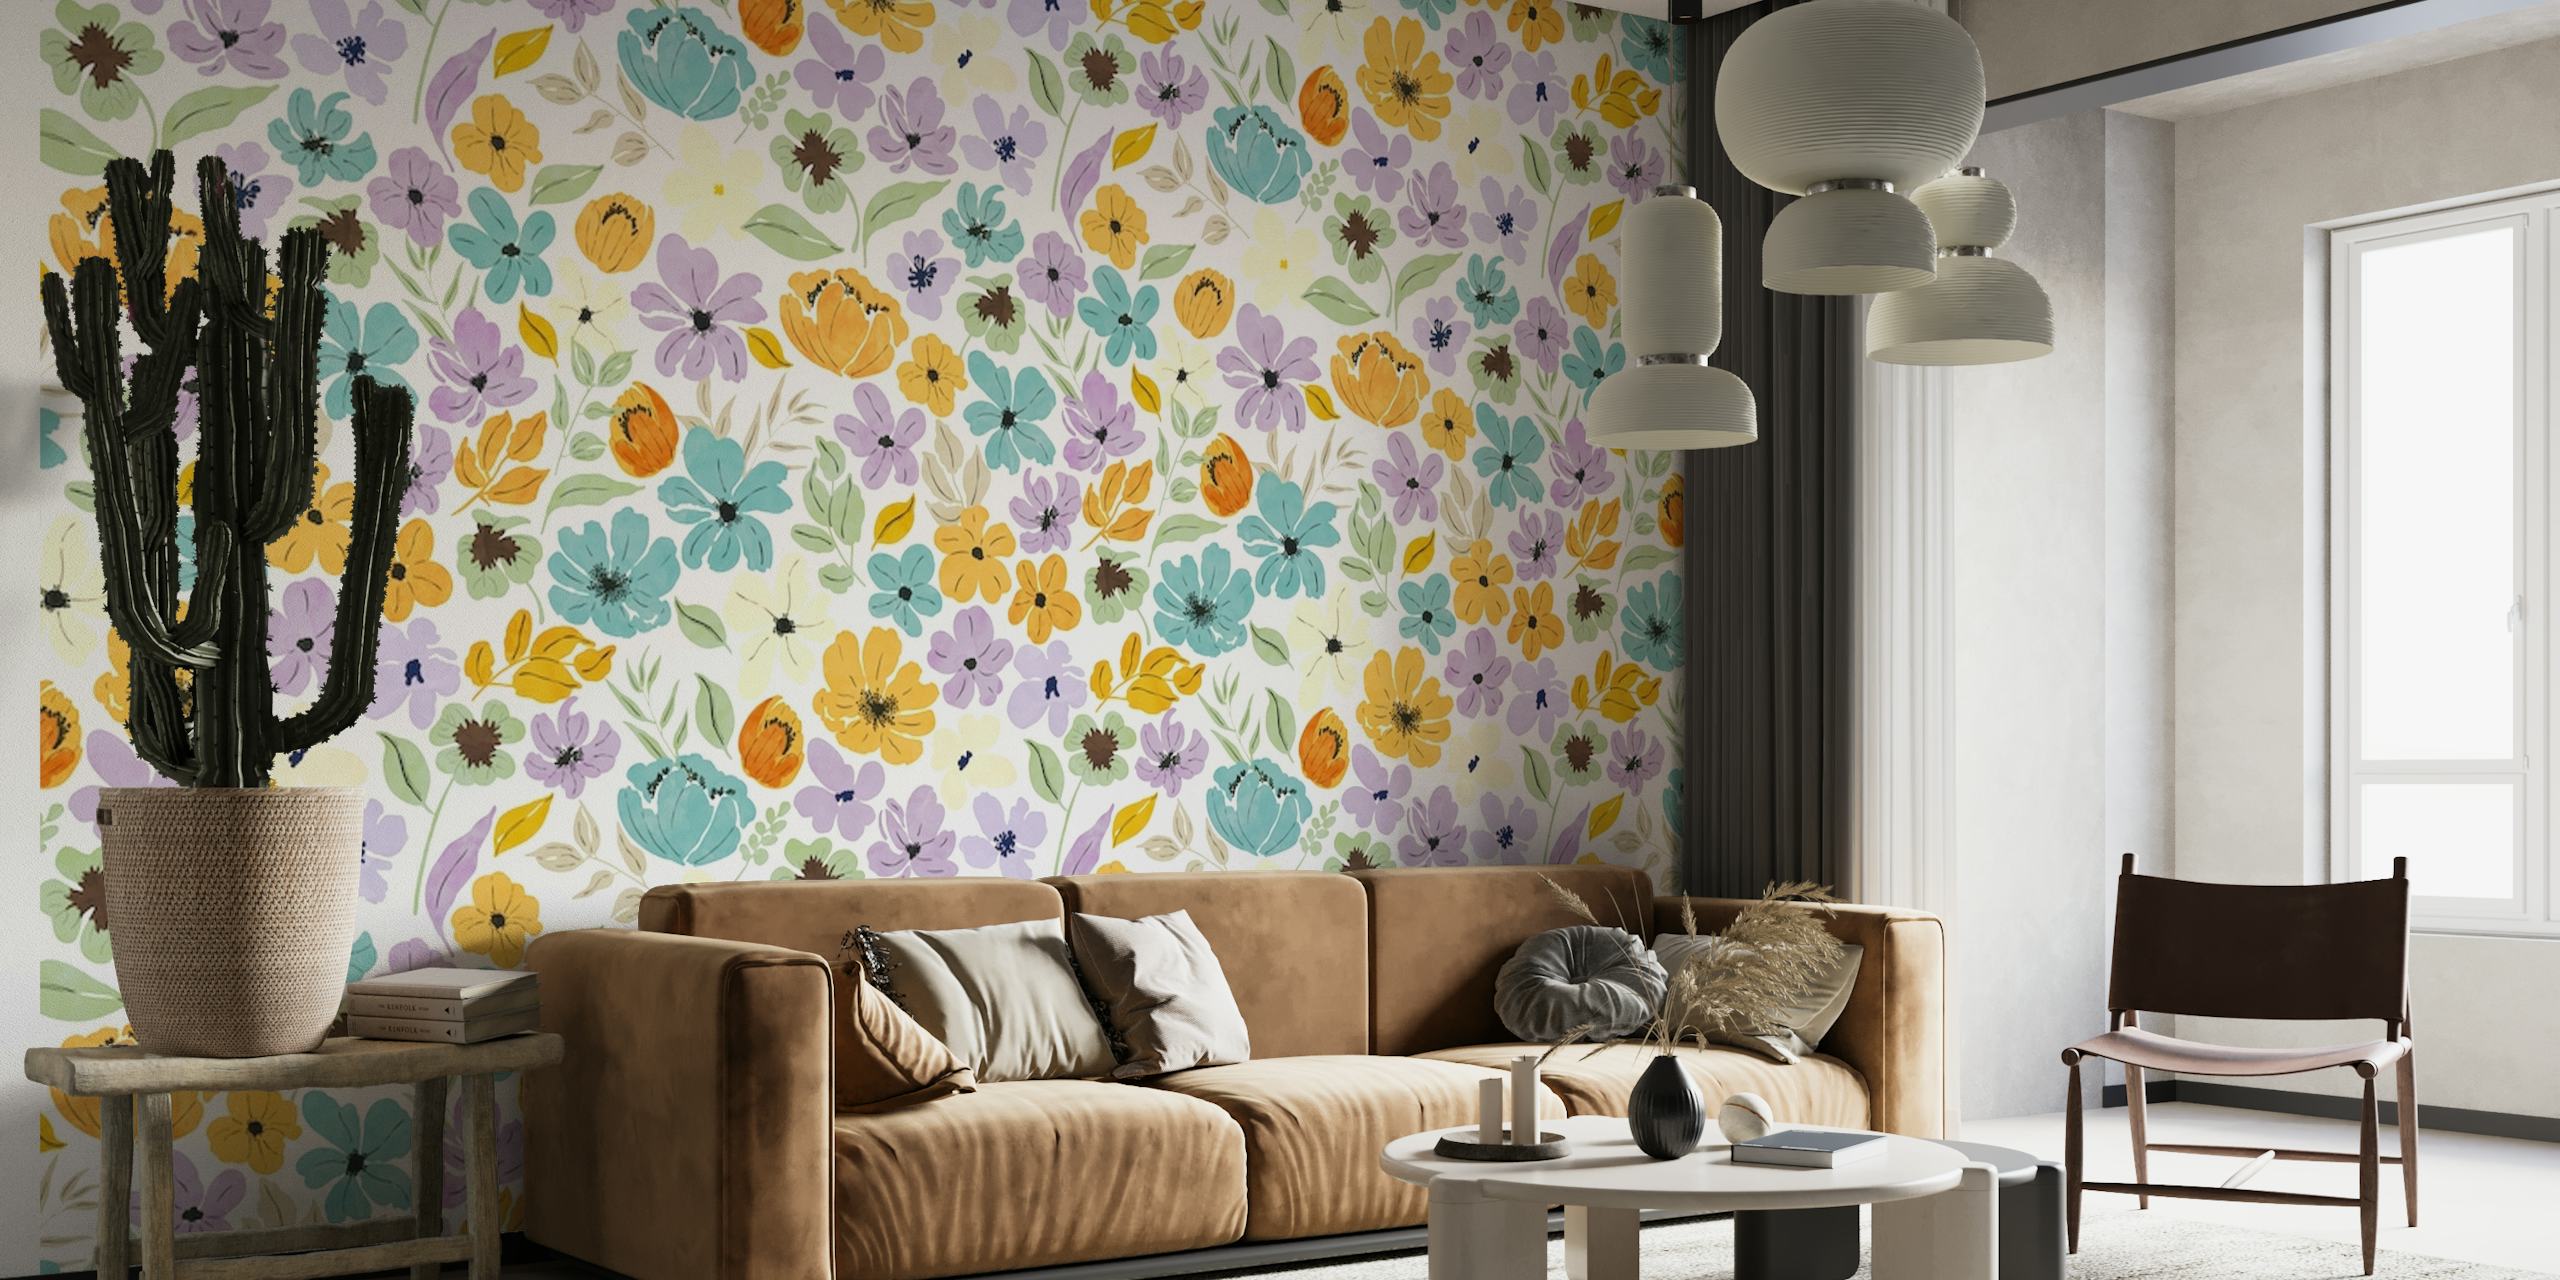 Decorative wall mural with a floral pattern of yellow and purple flowers interspersed with green foliage